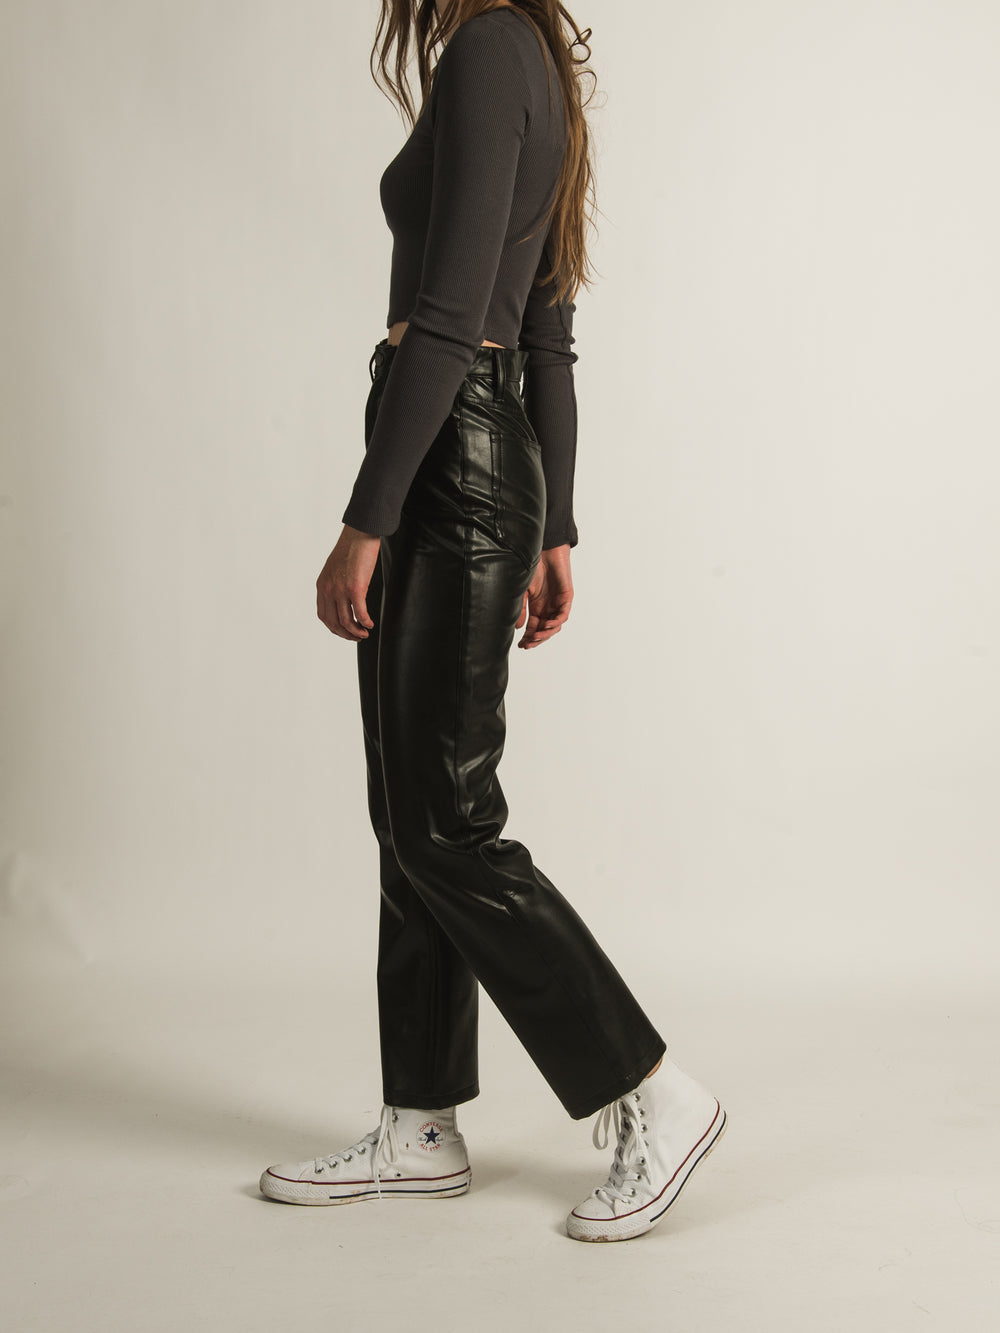 Hyfve High Rise Skinny Faux Leather Pant - Women's Pants in Black